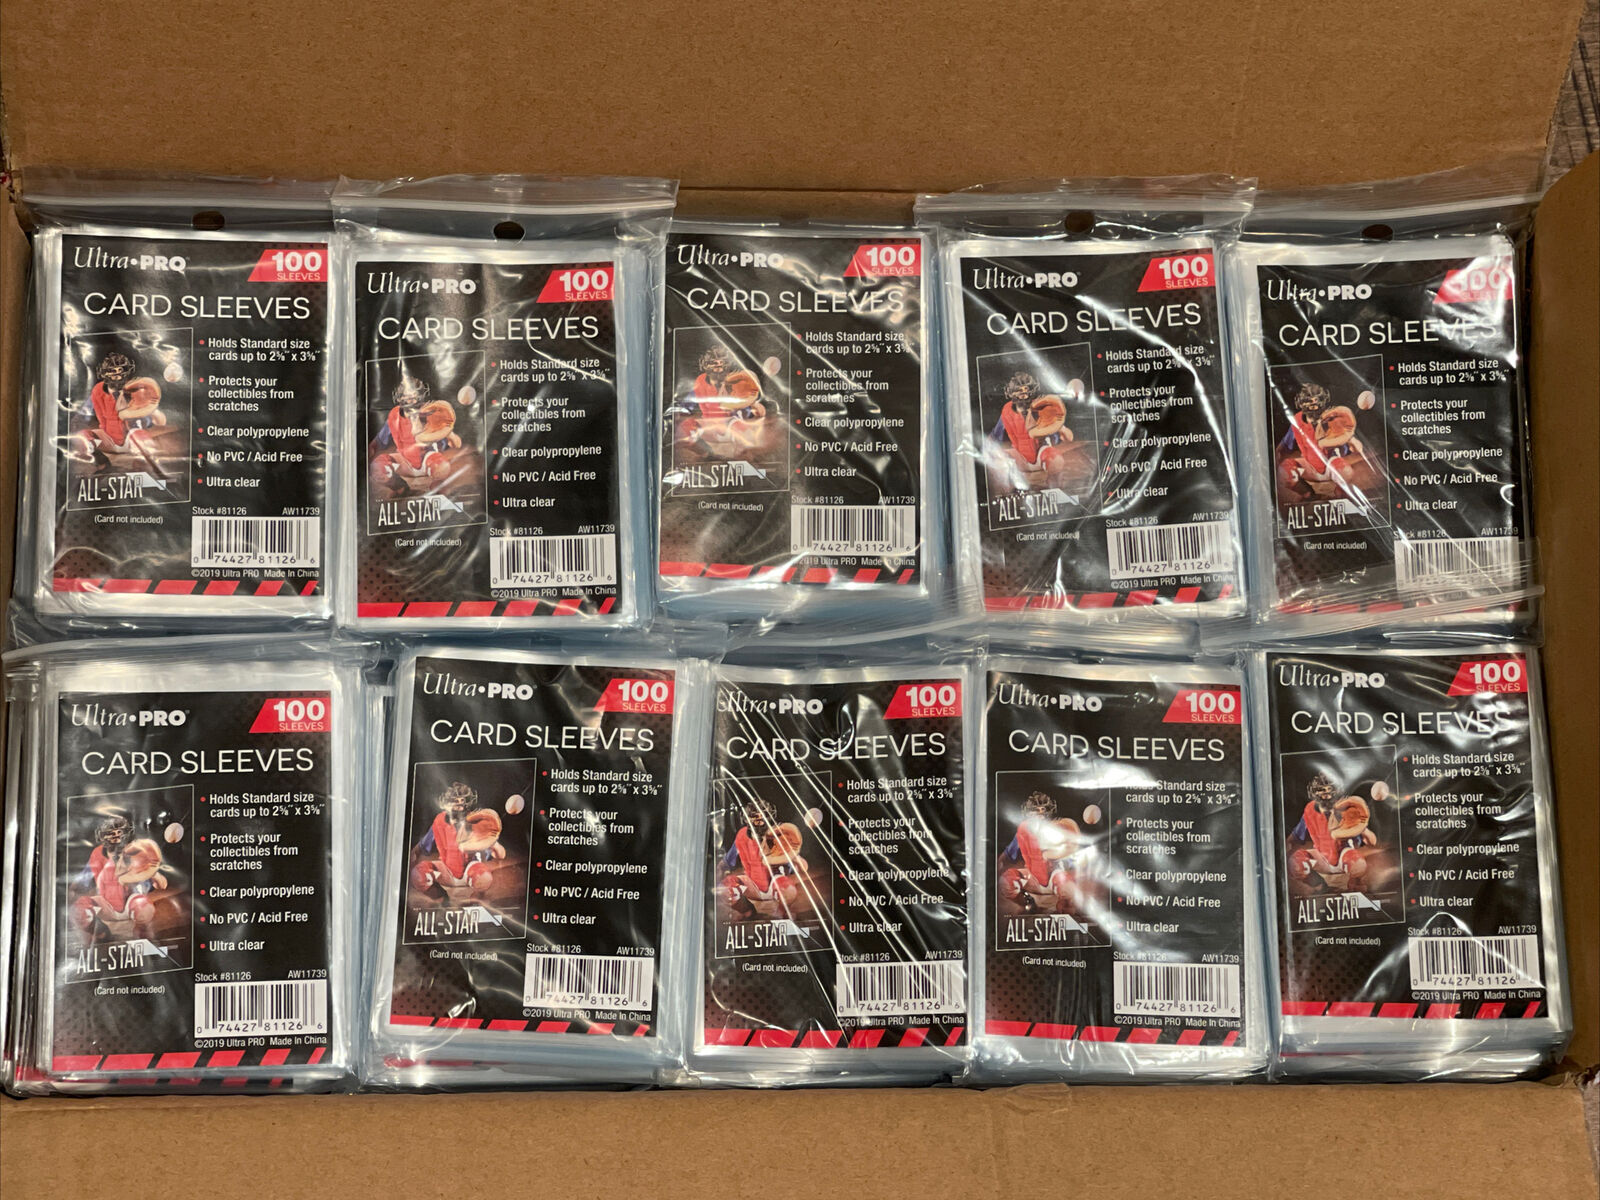 Ultra Pro Standard Size Soft Penny Sleeves CASE of 100 Packs, or 10,000 total